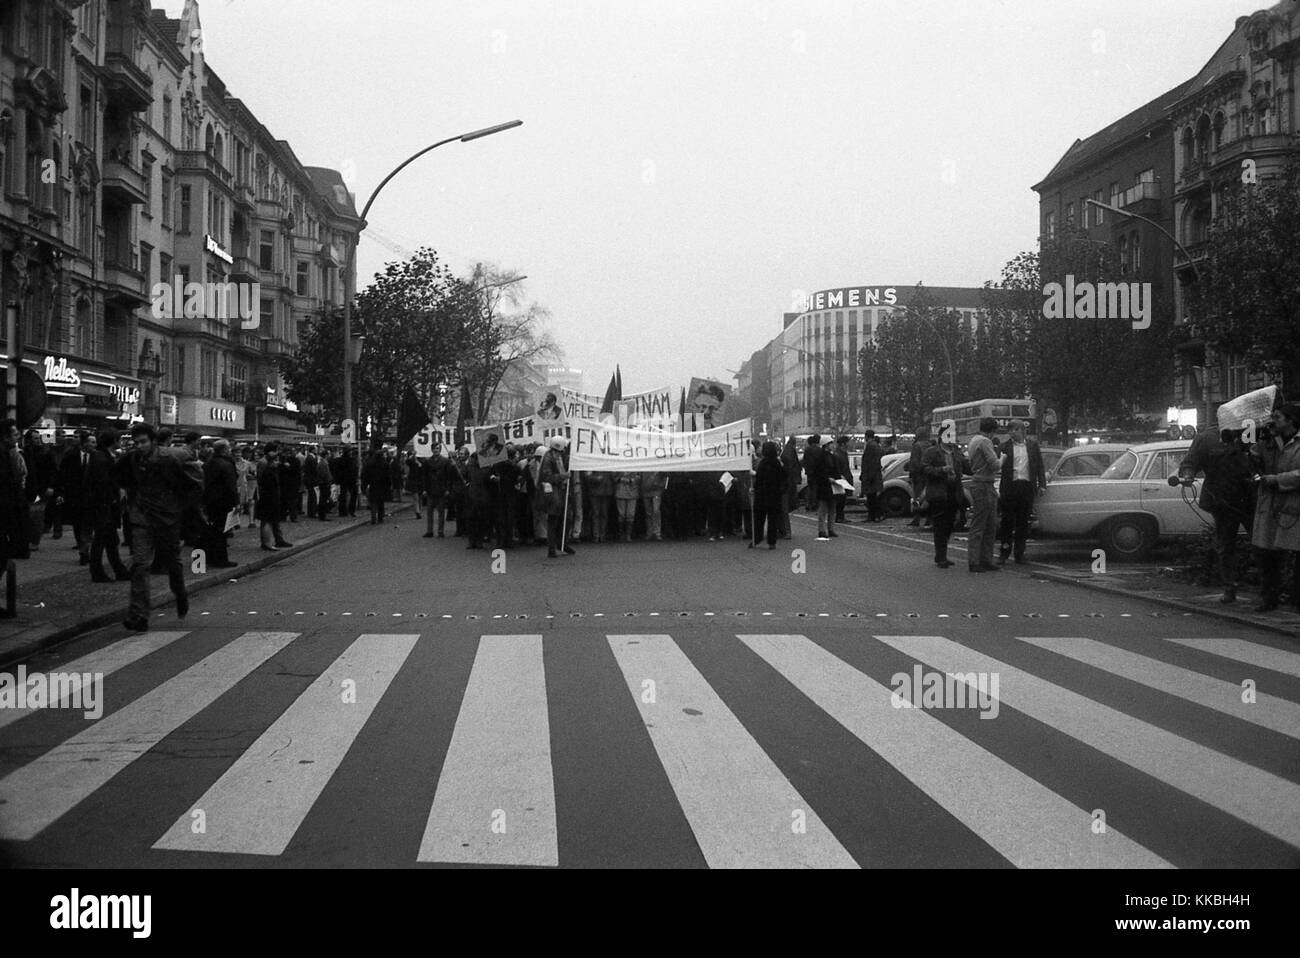 Philippe Gras / Le Pictorium -  Gathering in Berlin in 1968 -  1968  -  Germany / Berlin  -  The German demonstrations culminate on 17 and 18 February 1968. In Berlin, thousands of students from all over Europe oppose the war in Vietnam and the reform of universities. The movement is spreading to major German university cities. In 30 German cities, the student demonstrations turn to confrontation with the police. These are the Easter riots. The repression is brutal, and puts an end to massive demonstrations. The last one takes place in Bonn on May 11, 1968, and brings together a hundred thousa Stock Photo